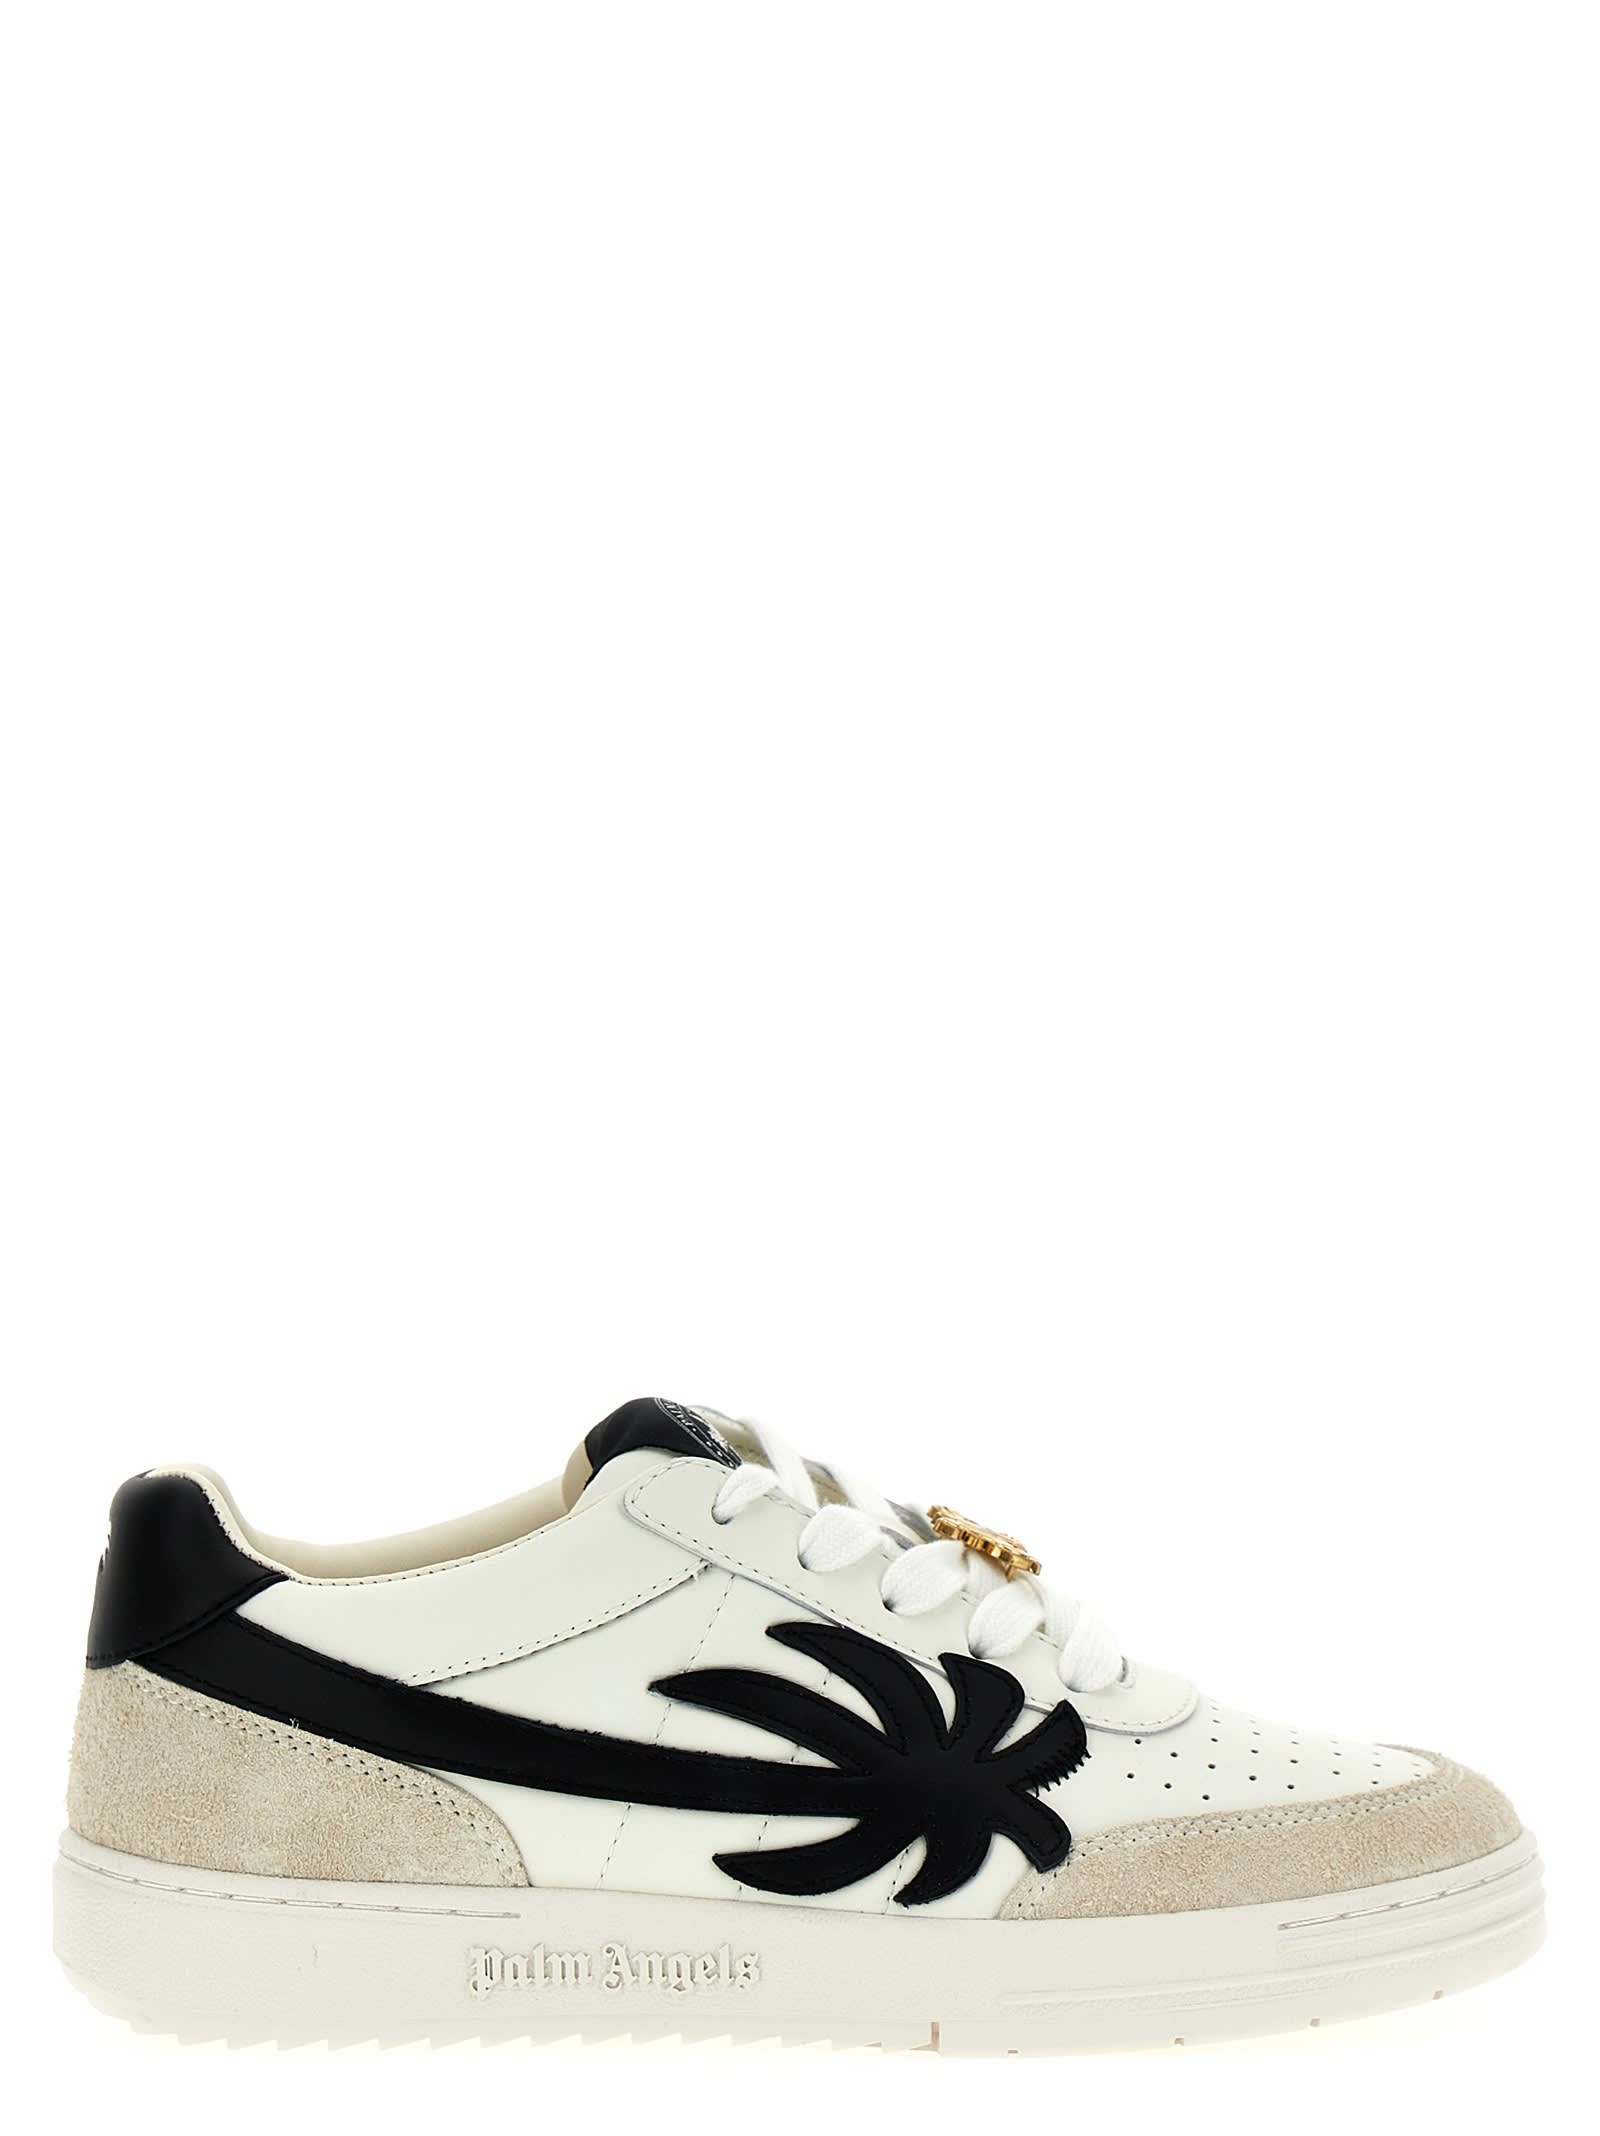 Shop Palm Angels Palm Beach University Sneakers In White/black